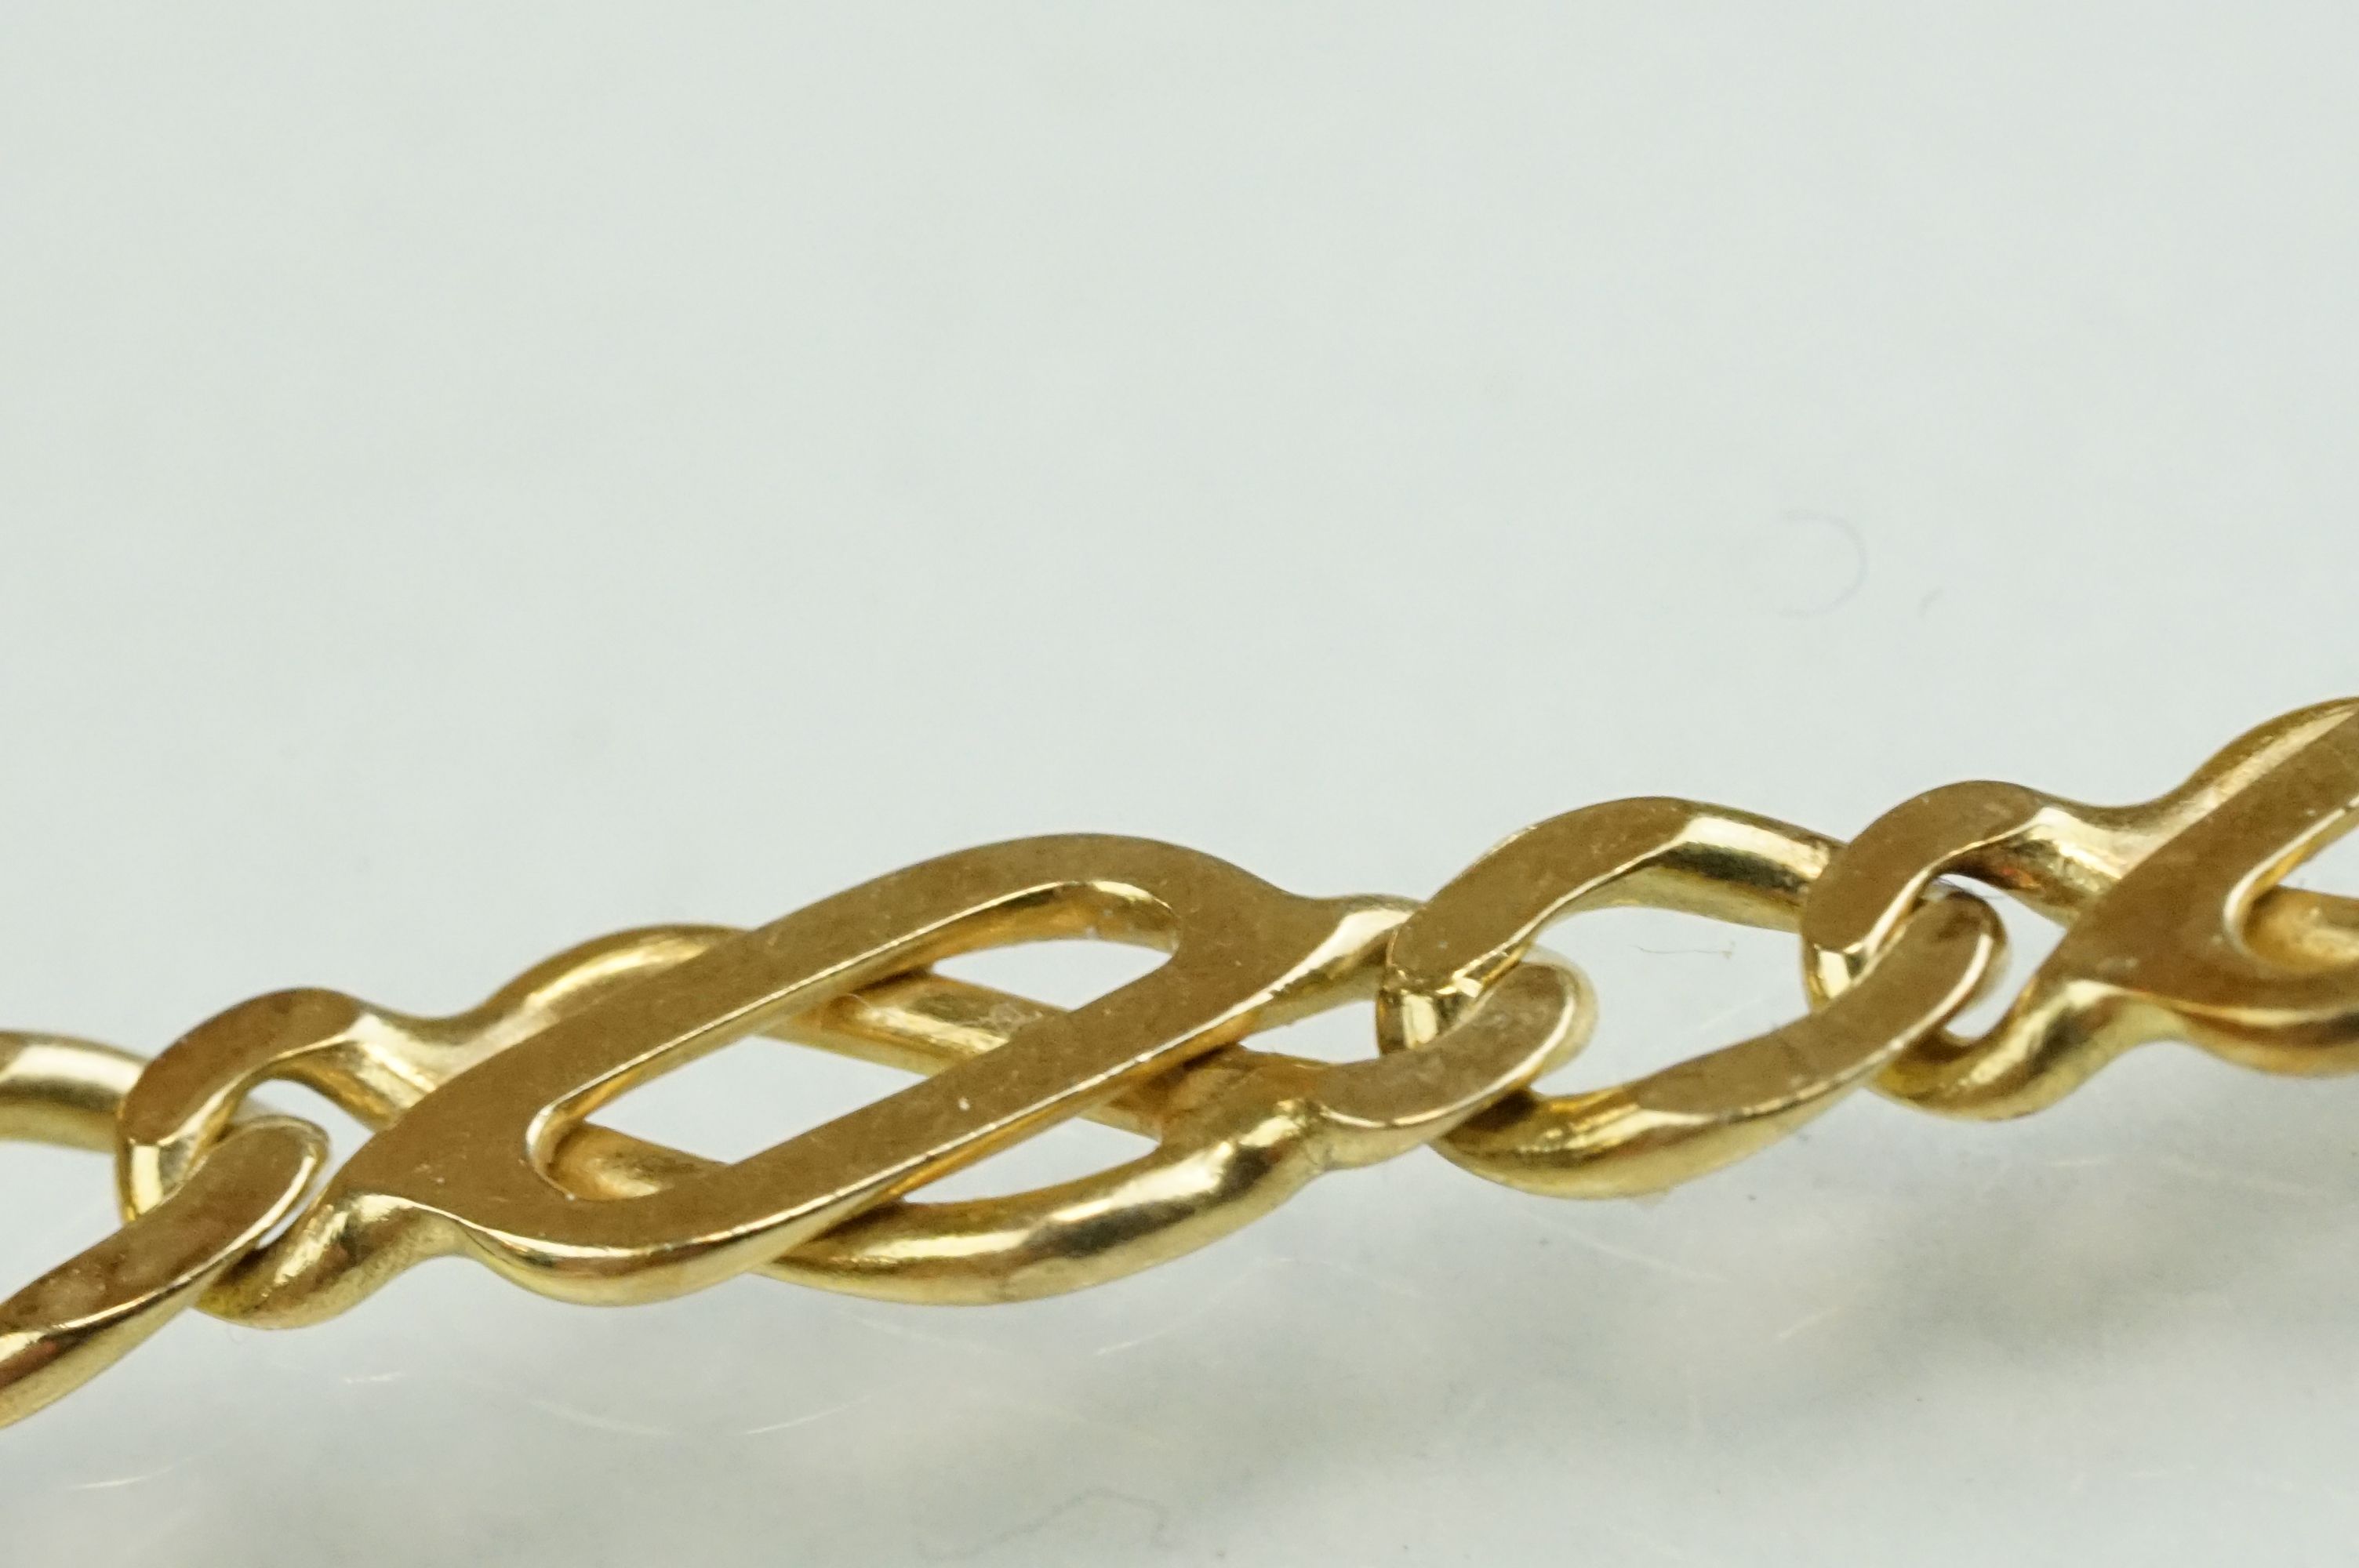 9ct yellow gold fancy link necklace, lobster clasp, length approx 46cm - Image 7 of 8